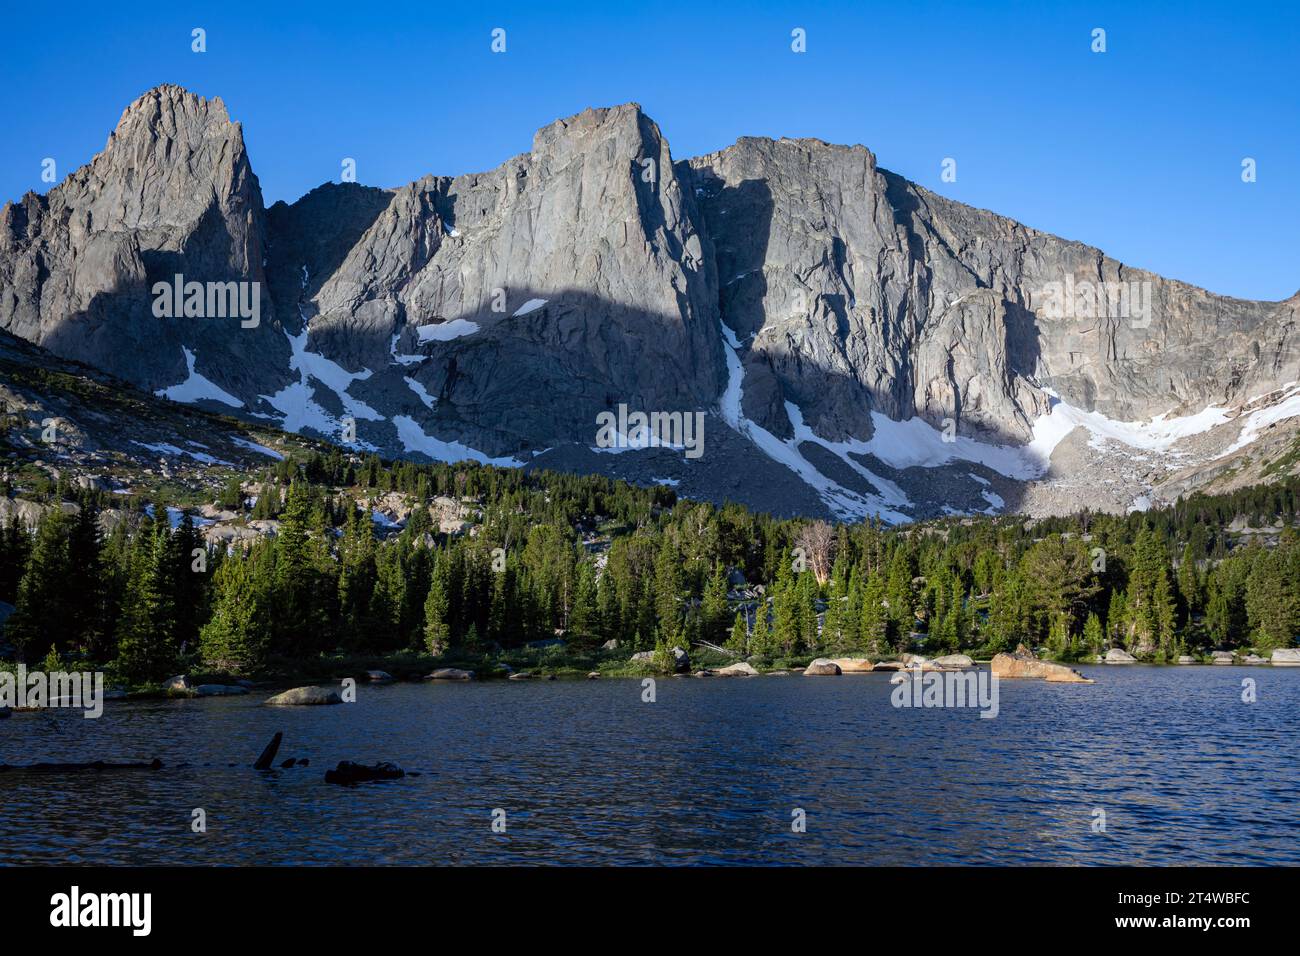 WY05561-00...WYOMING - - Warbonnet, Warrior and Warrior 2 Peaks above Lonesome Lake in the Cirque of the Towers in the Popo Agie Wilderness. Stock Photo